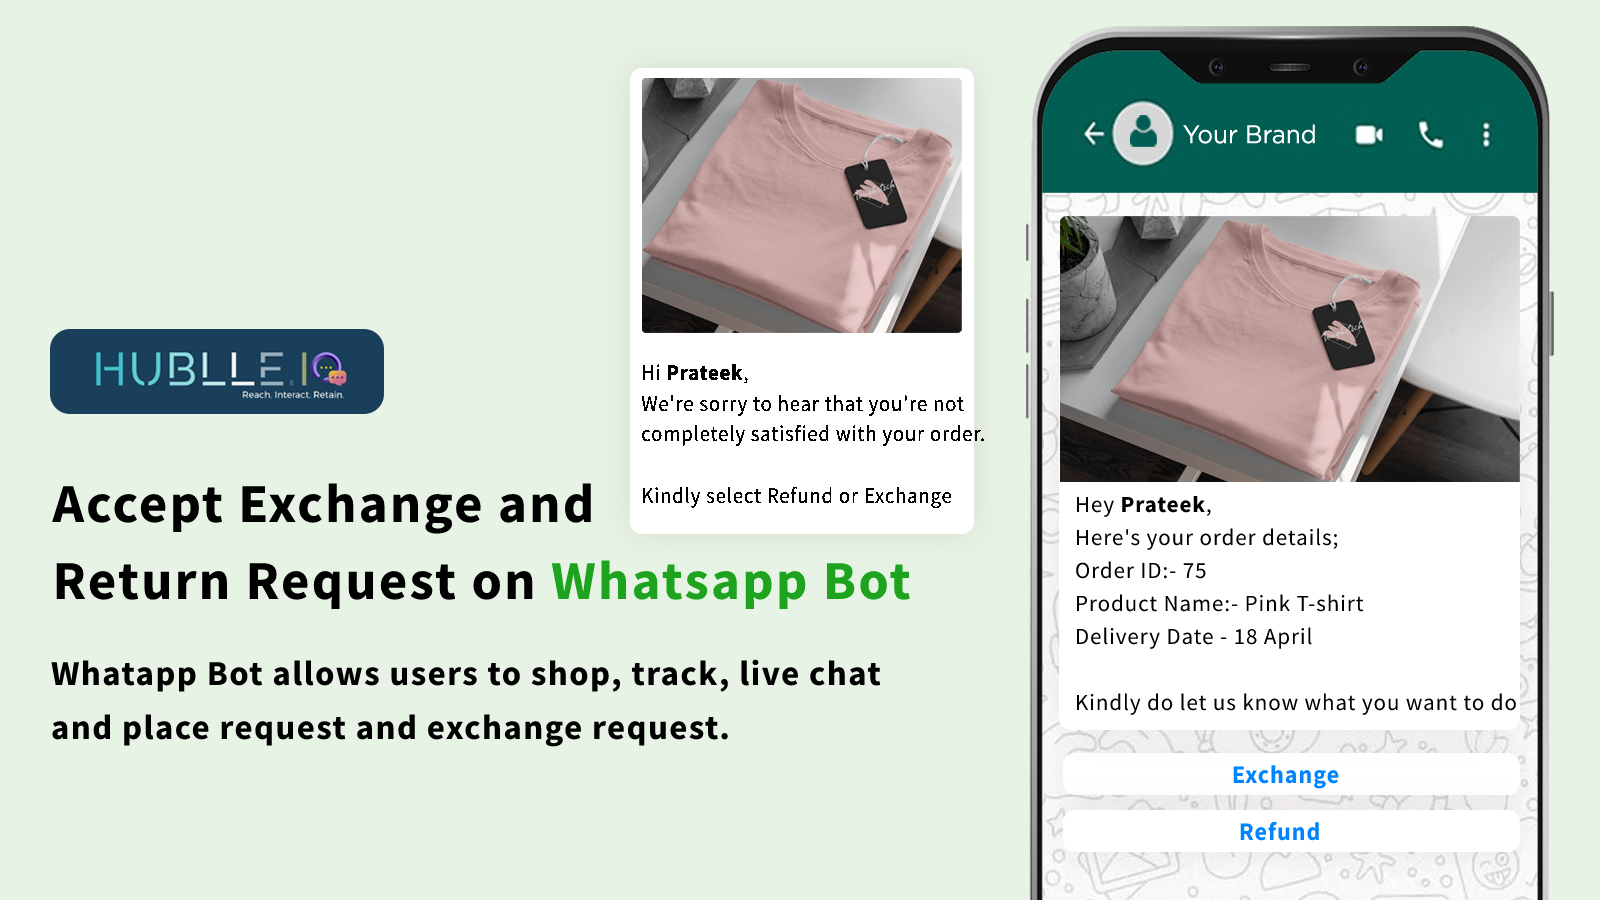 Accept Exchange and Return Request on Whatsapp Bot